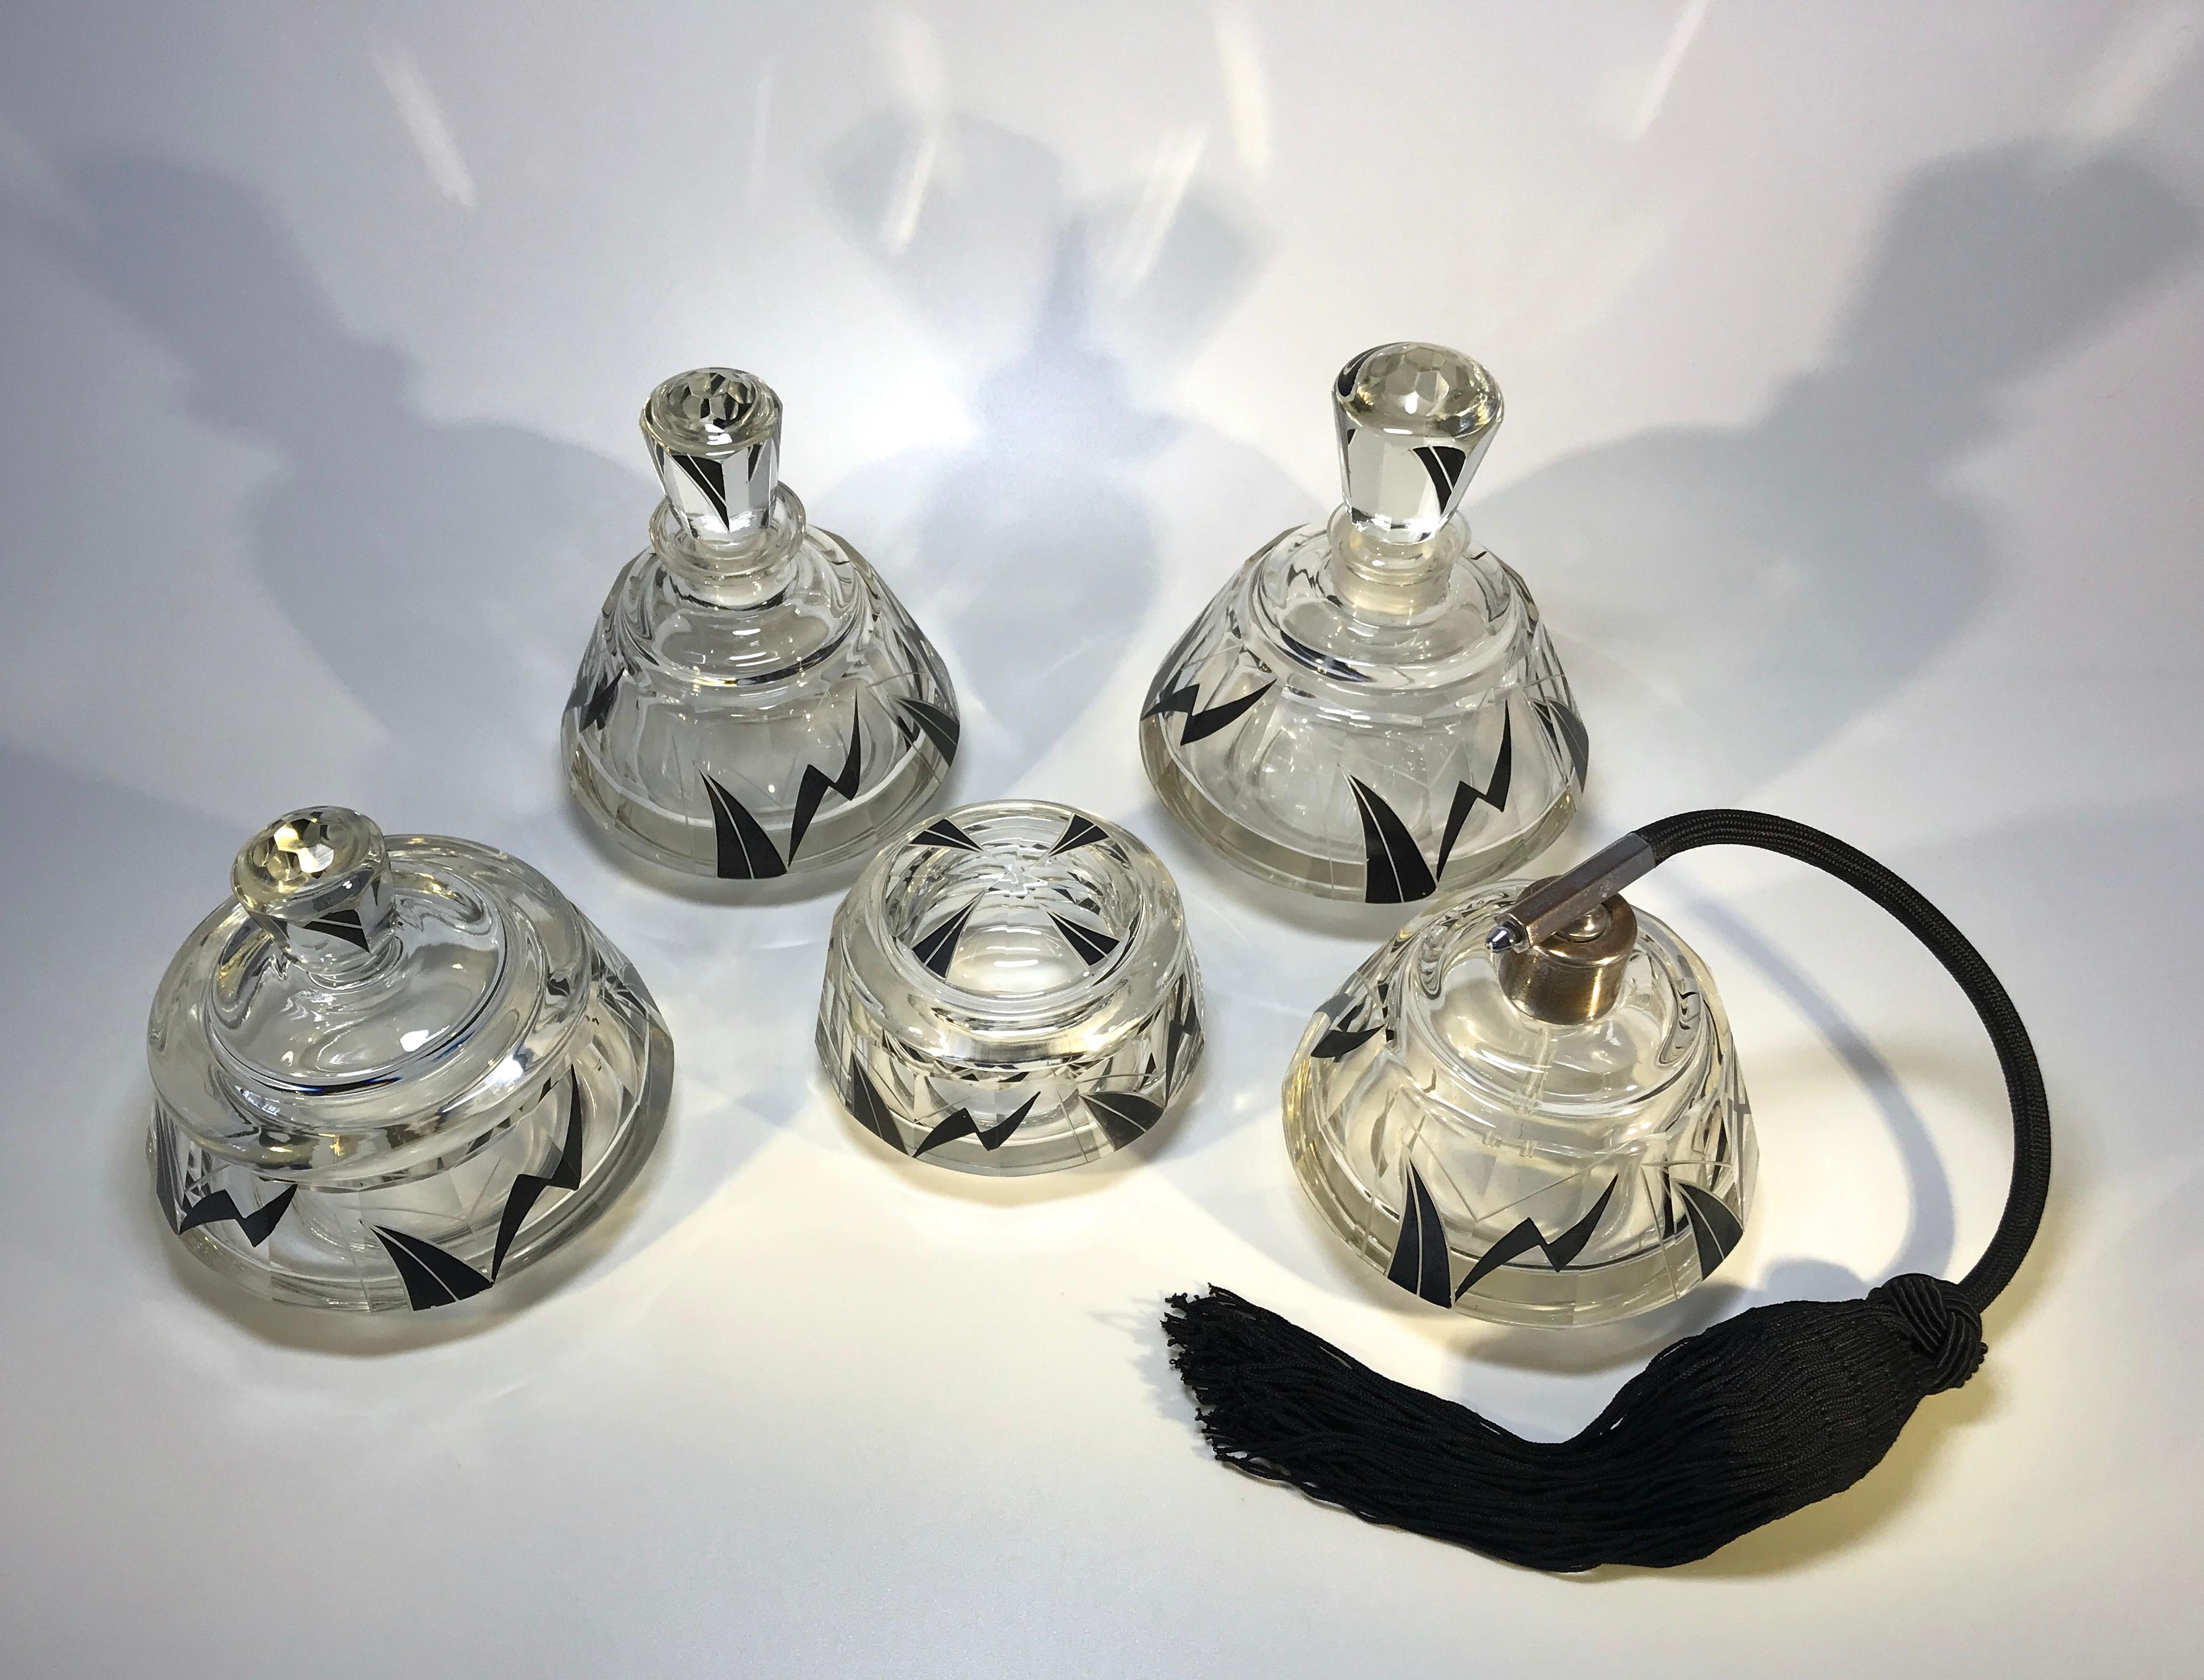 Fabulous Karl Palda Art Deco Czech Black Enamel Perfume 5 Piece Vanity Set 1920s In Good Condition For Sale In Rothley, Leicestershire